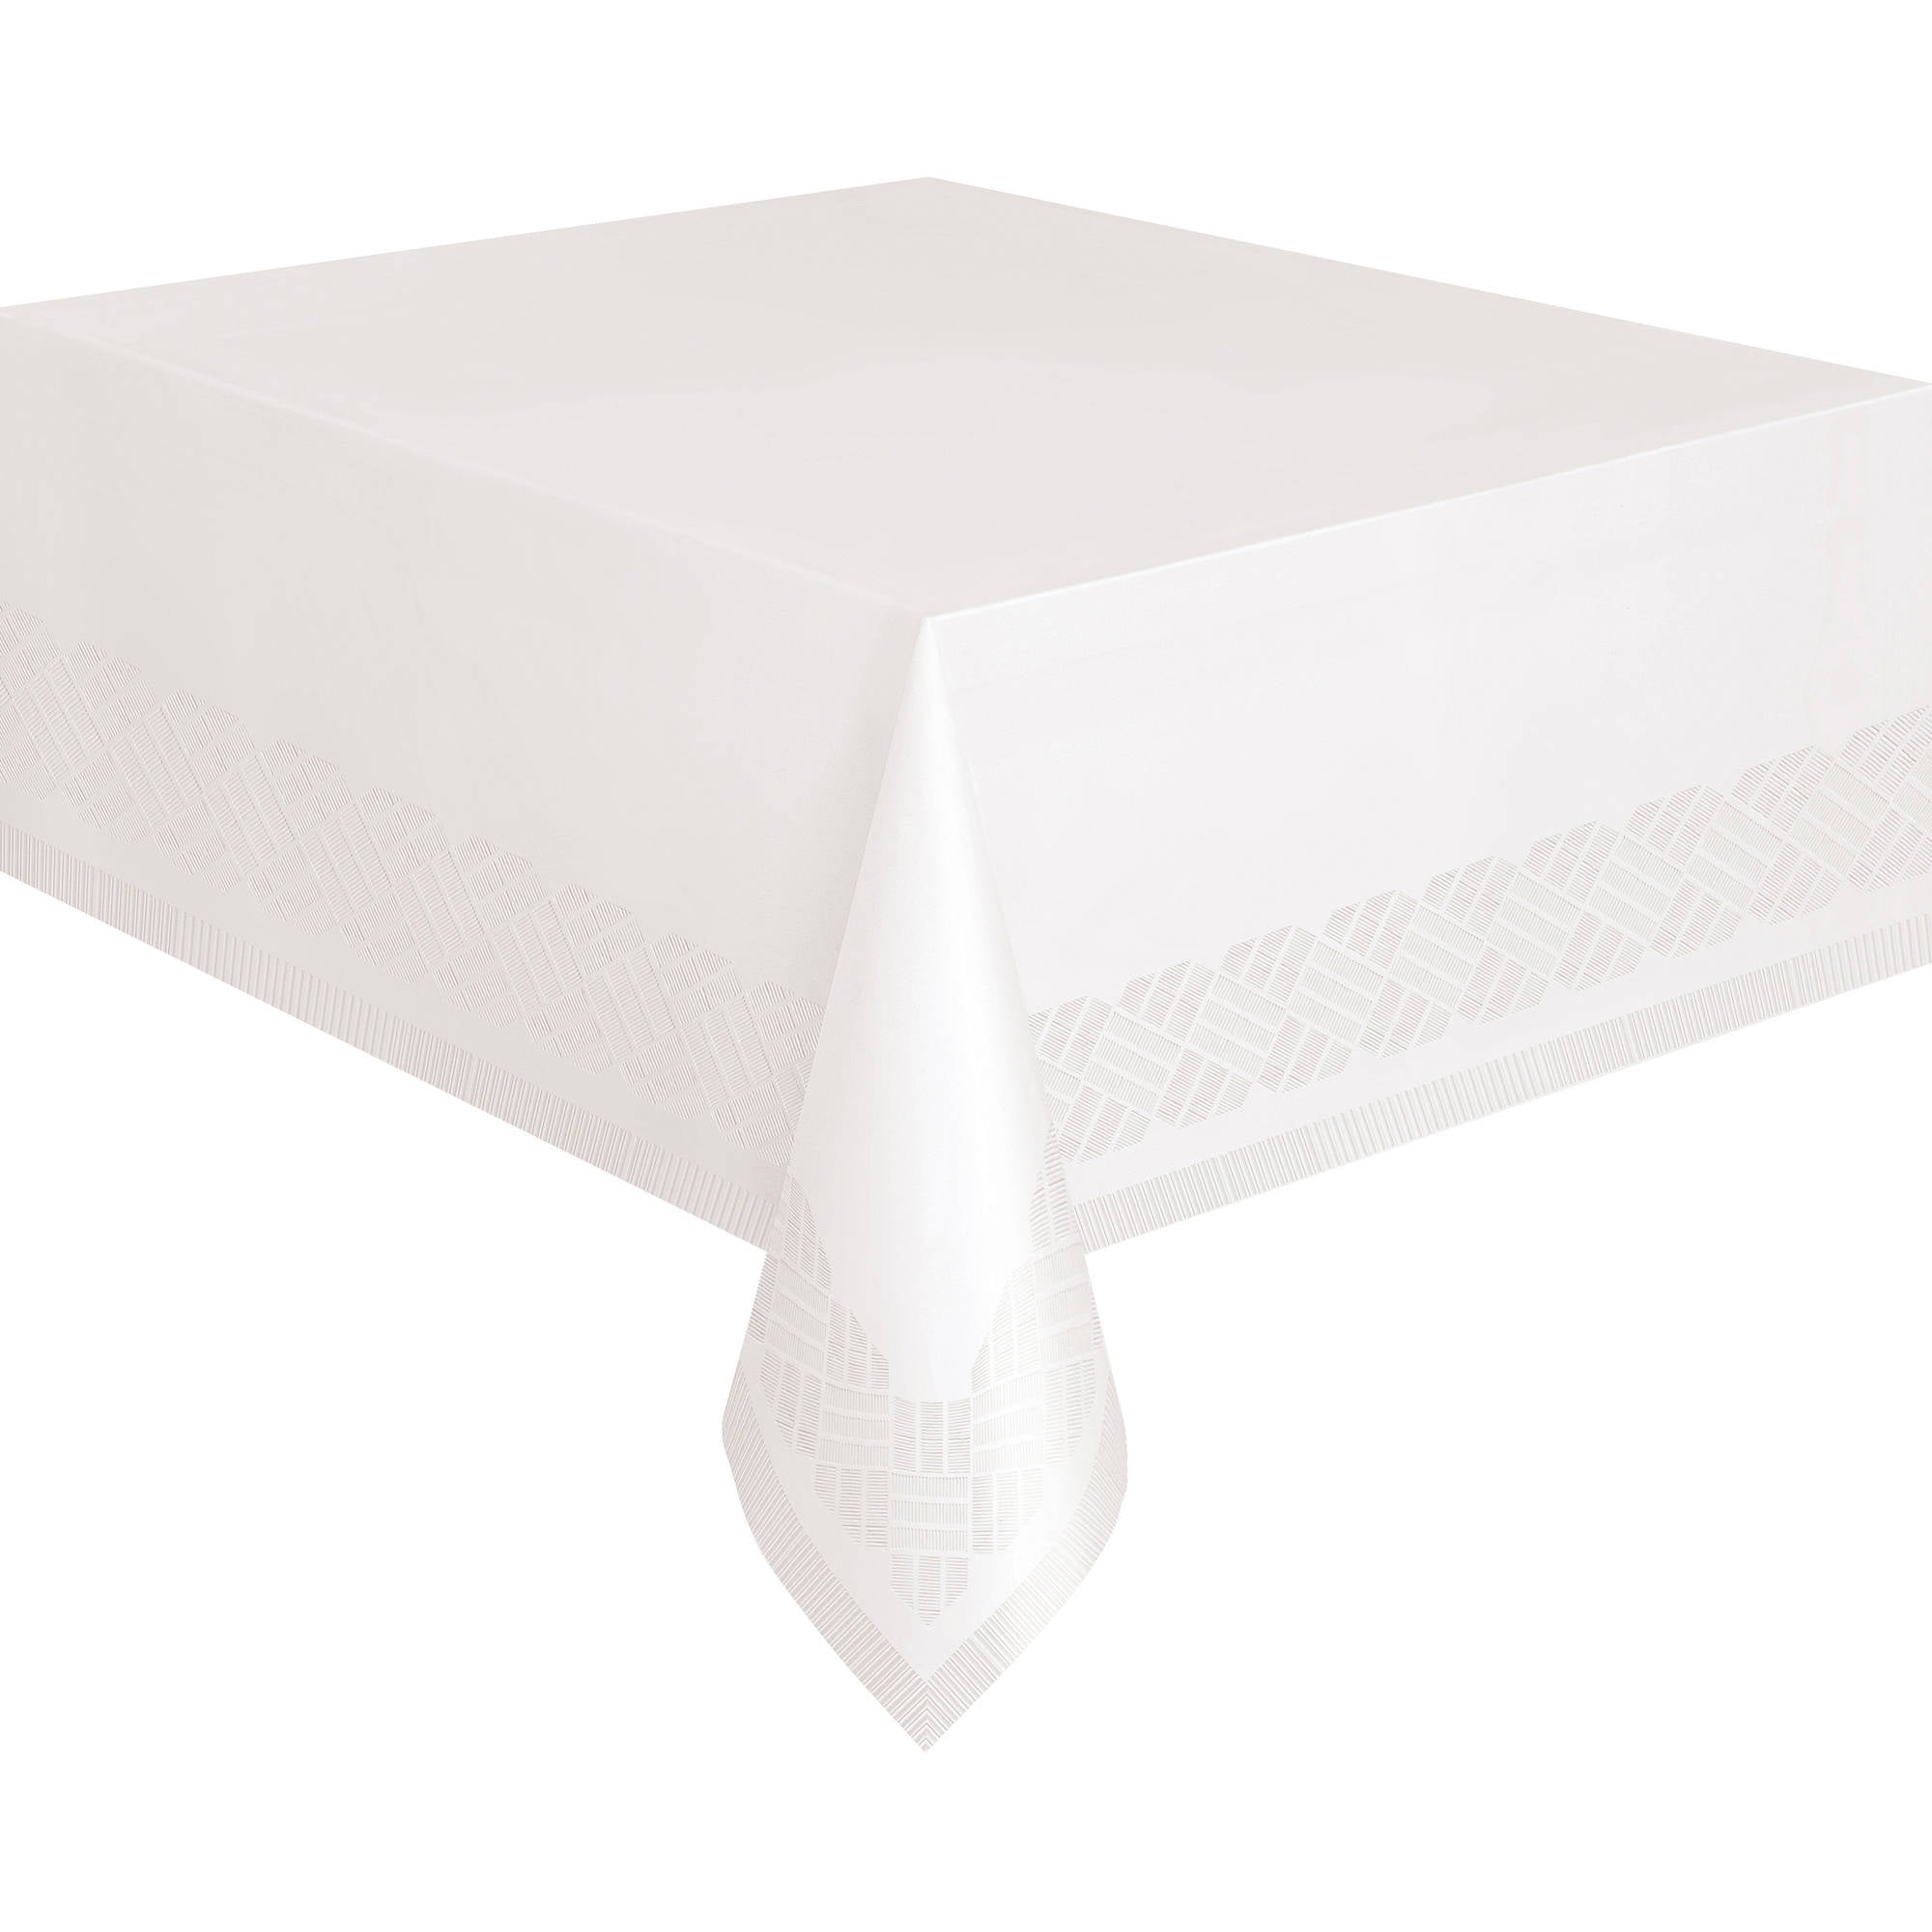 White Plastic Lined Paper Party, 90 Round White Paper Tablecloths